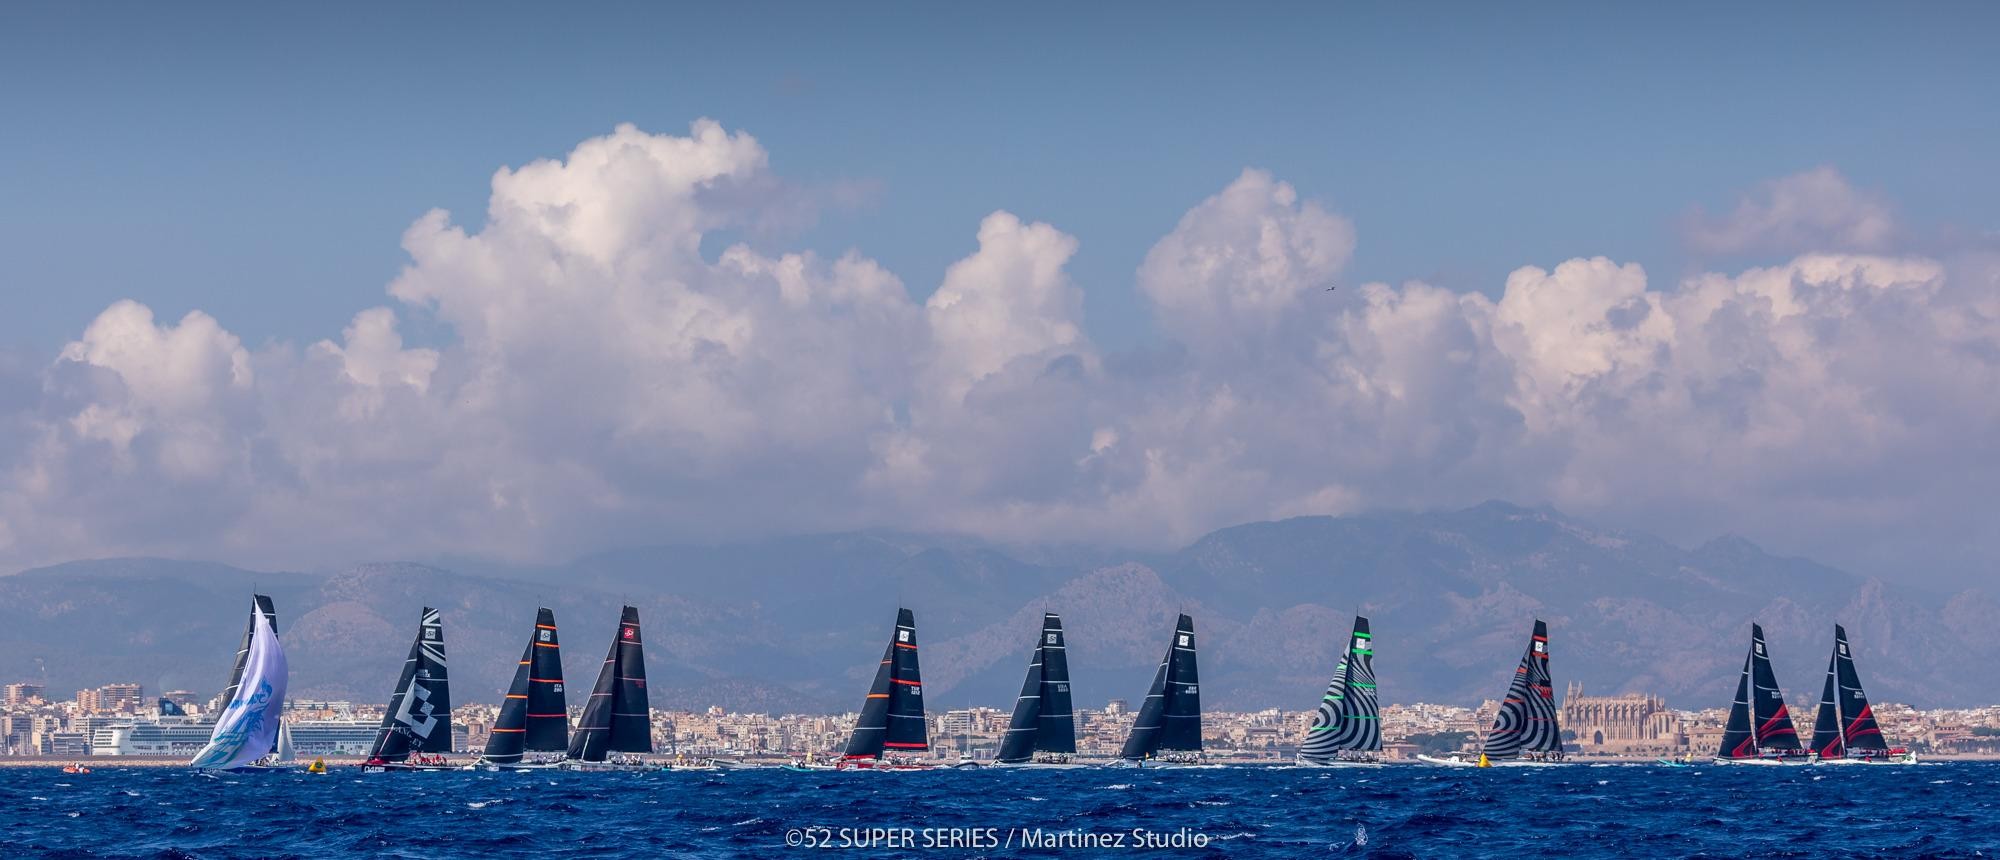 Marc Blees and Code Zero set their sights high at the Rolex TP52 World Championship